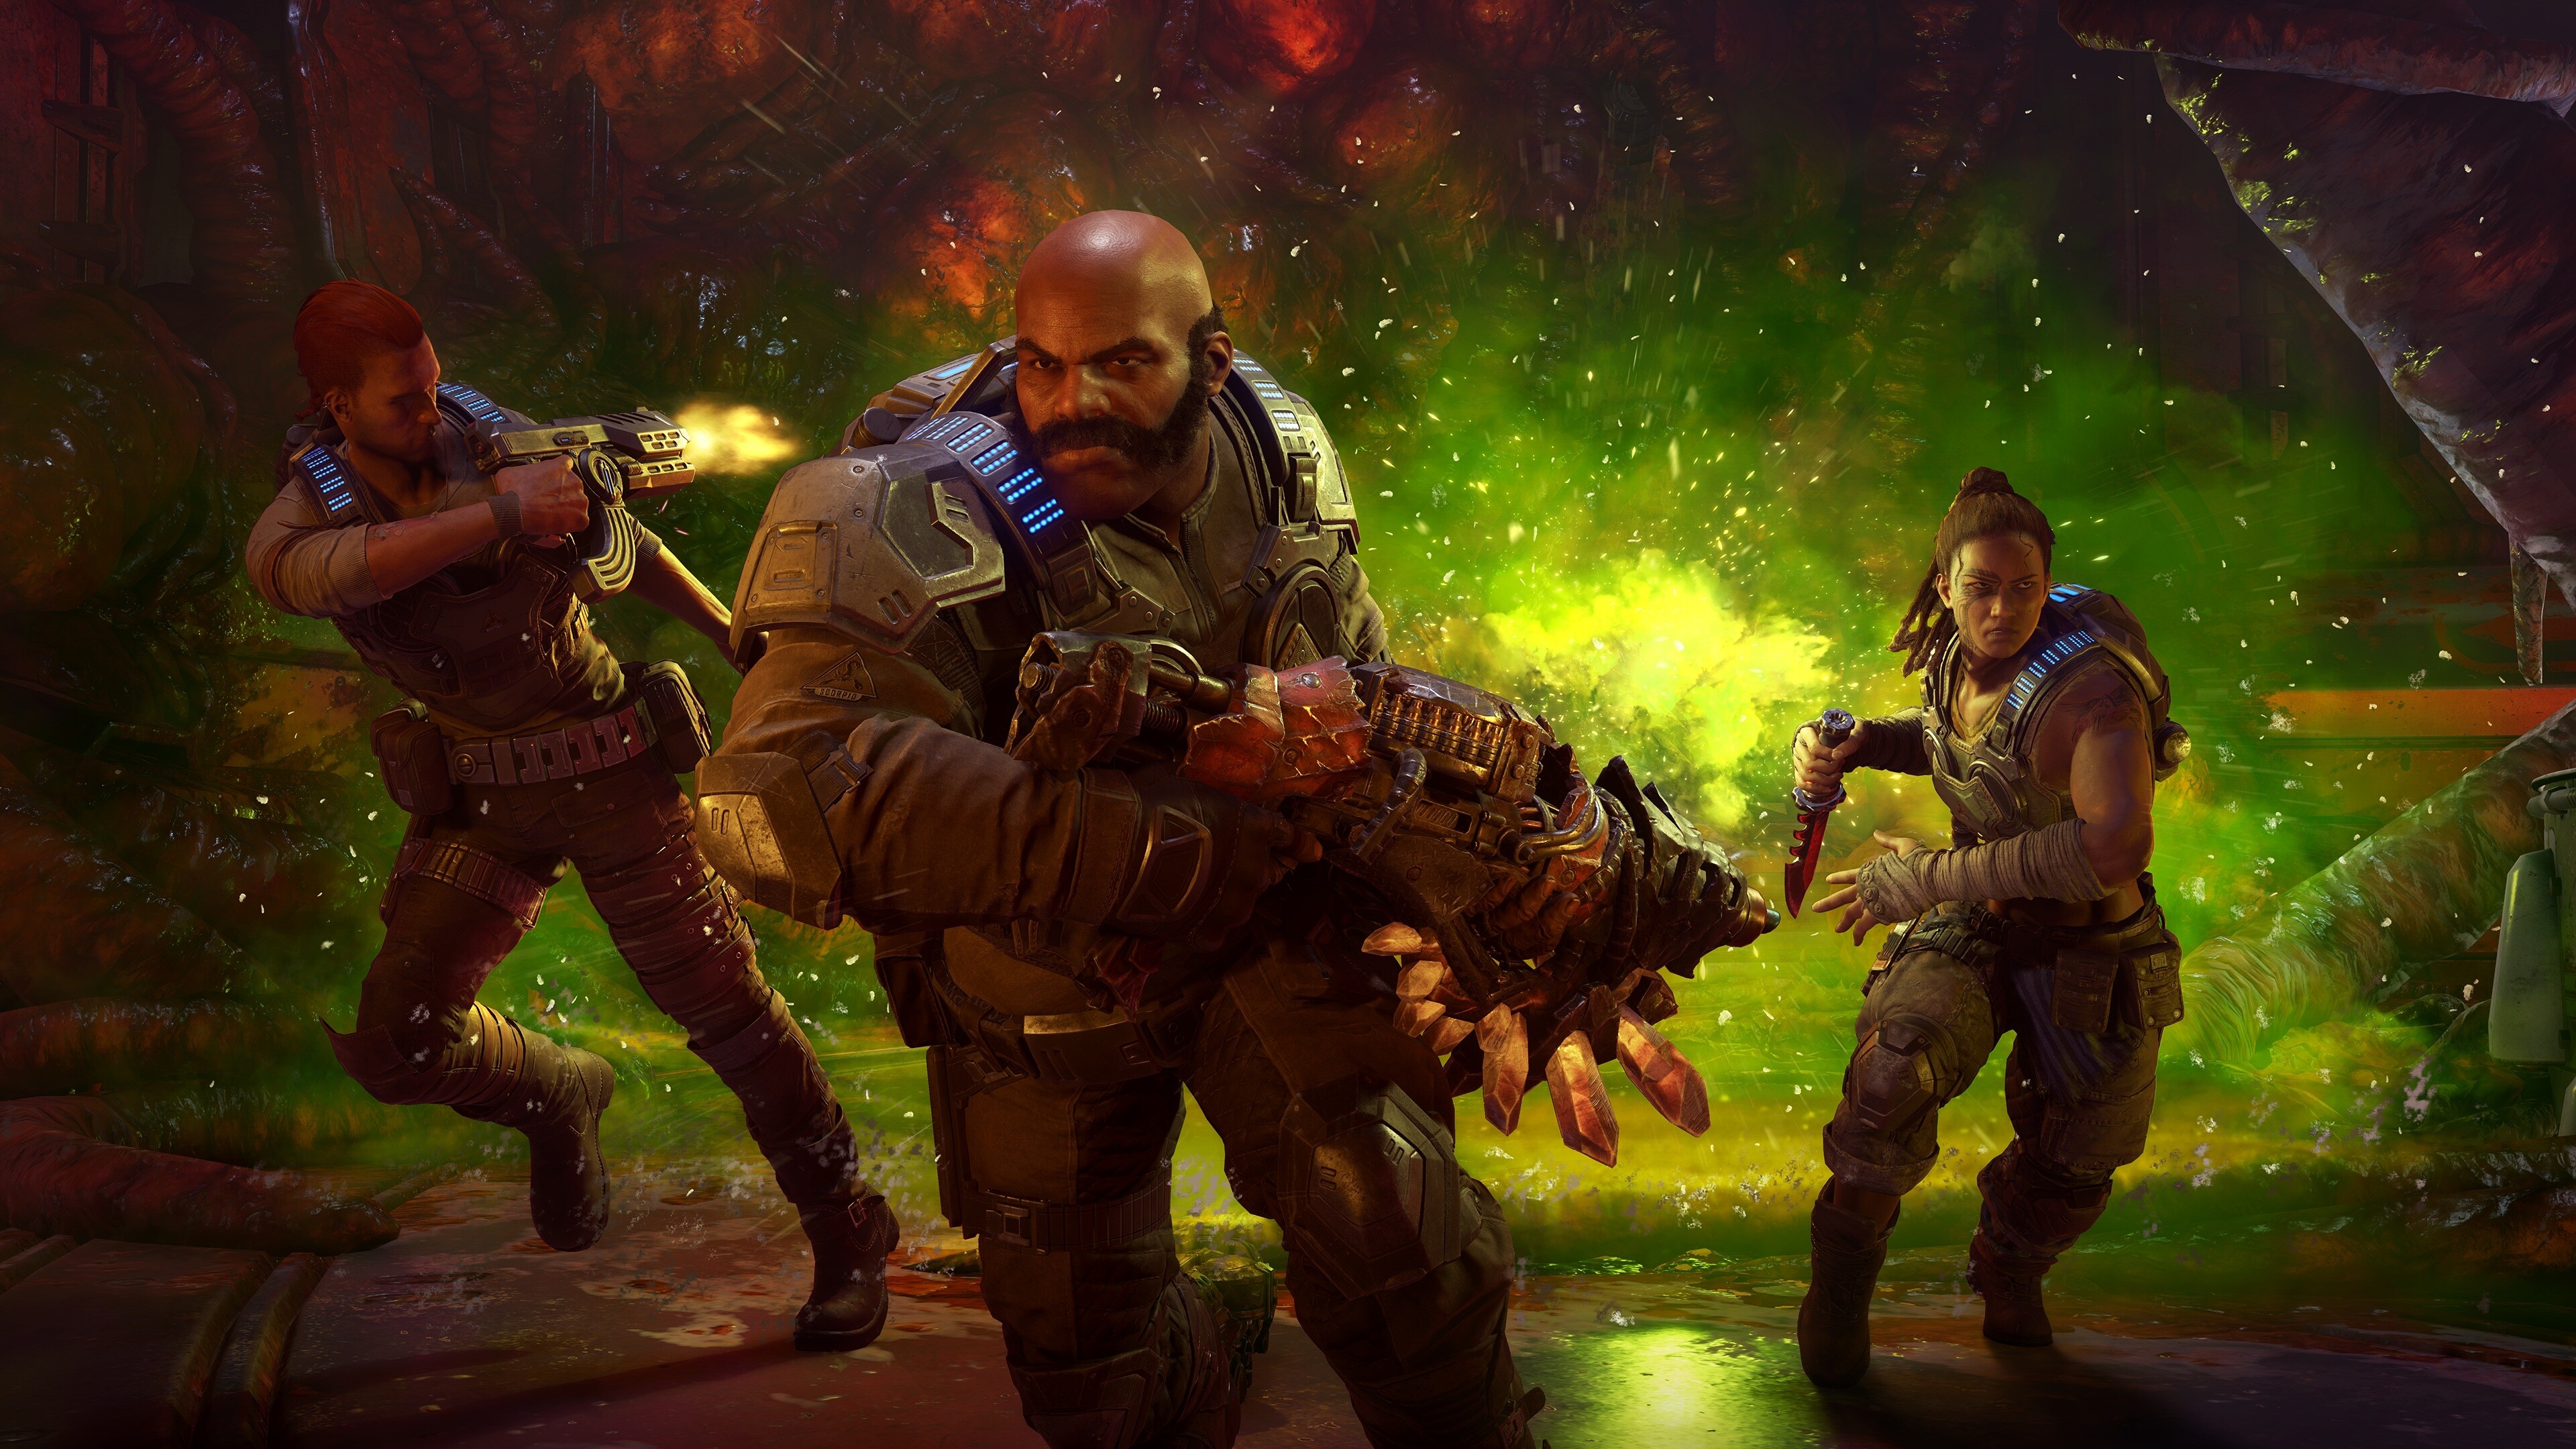 Gears of War: Lahni, Keegan and Mac, Hivebusters, Condor Crash Sites, Outsider Campsite. 3840x2160 4K Background.